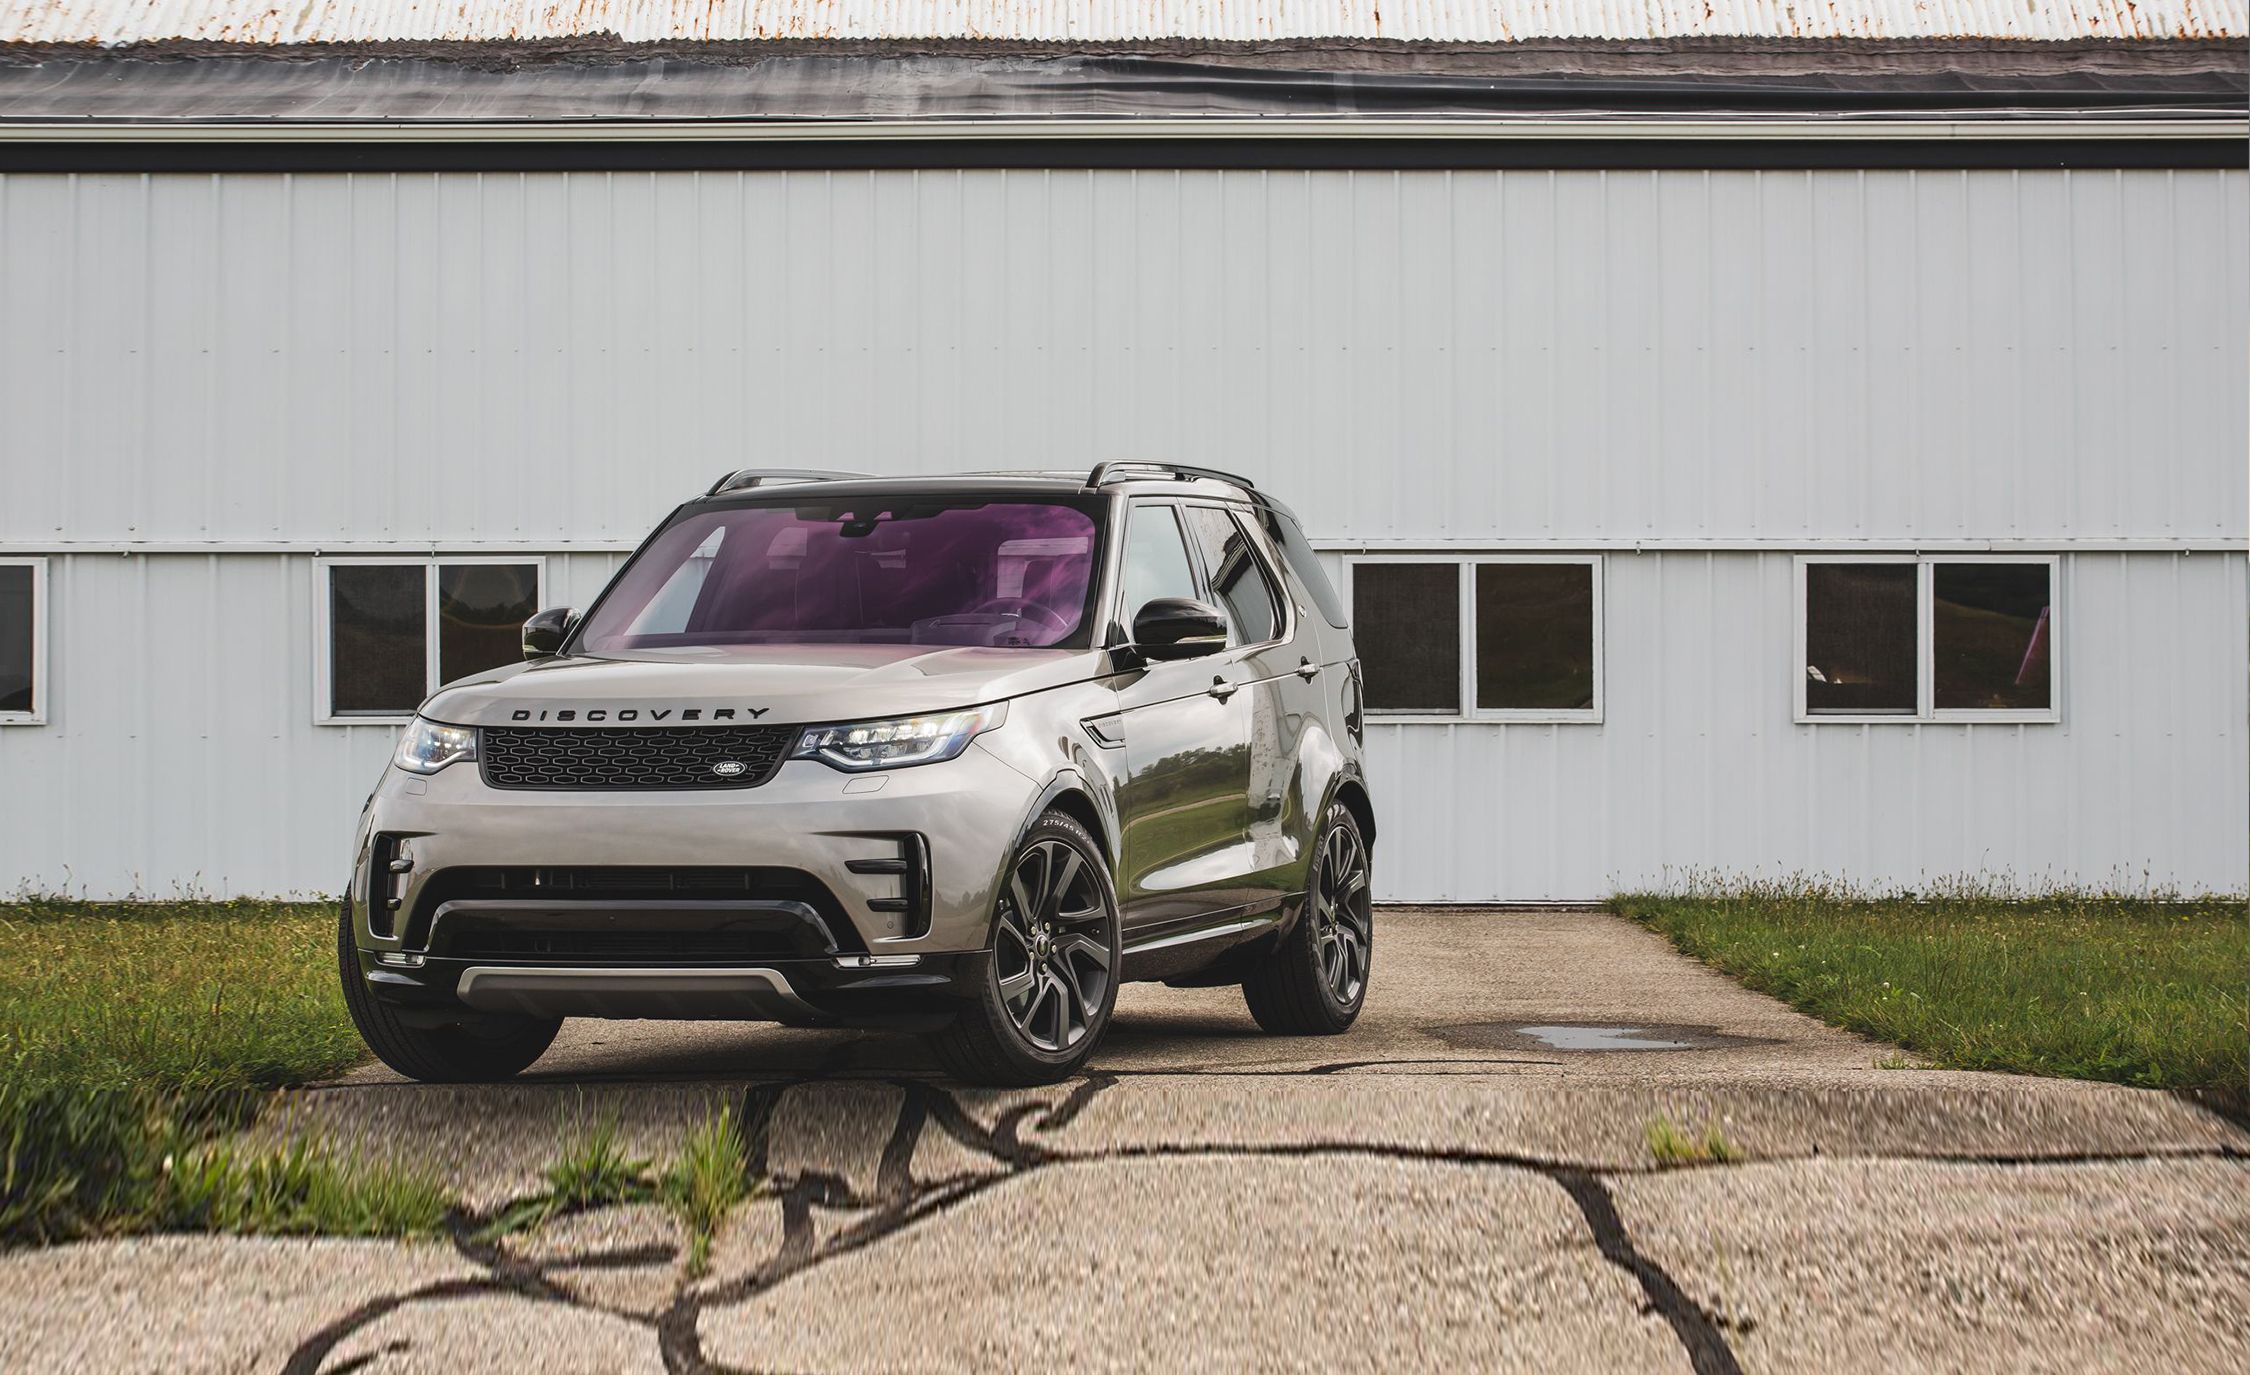 Ленд ровер дискавери 2019. Land Rover Discovery 2019. Land Rover Discovery 5 Dimensions.